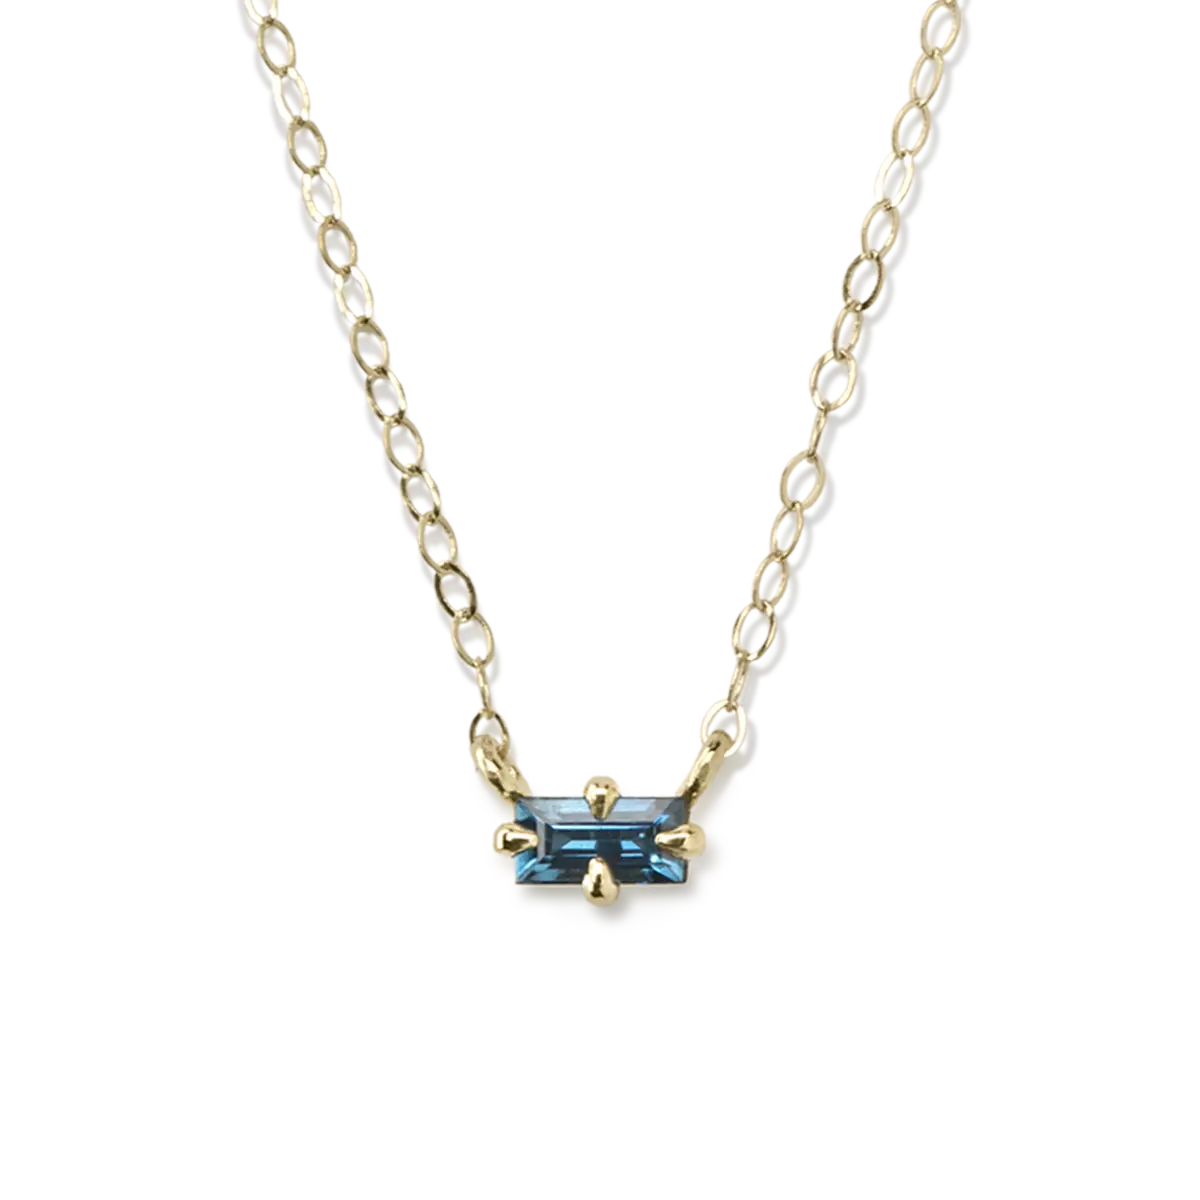 Primary blue sapphire necklace - Squash Blossom Vail